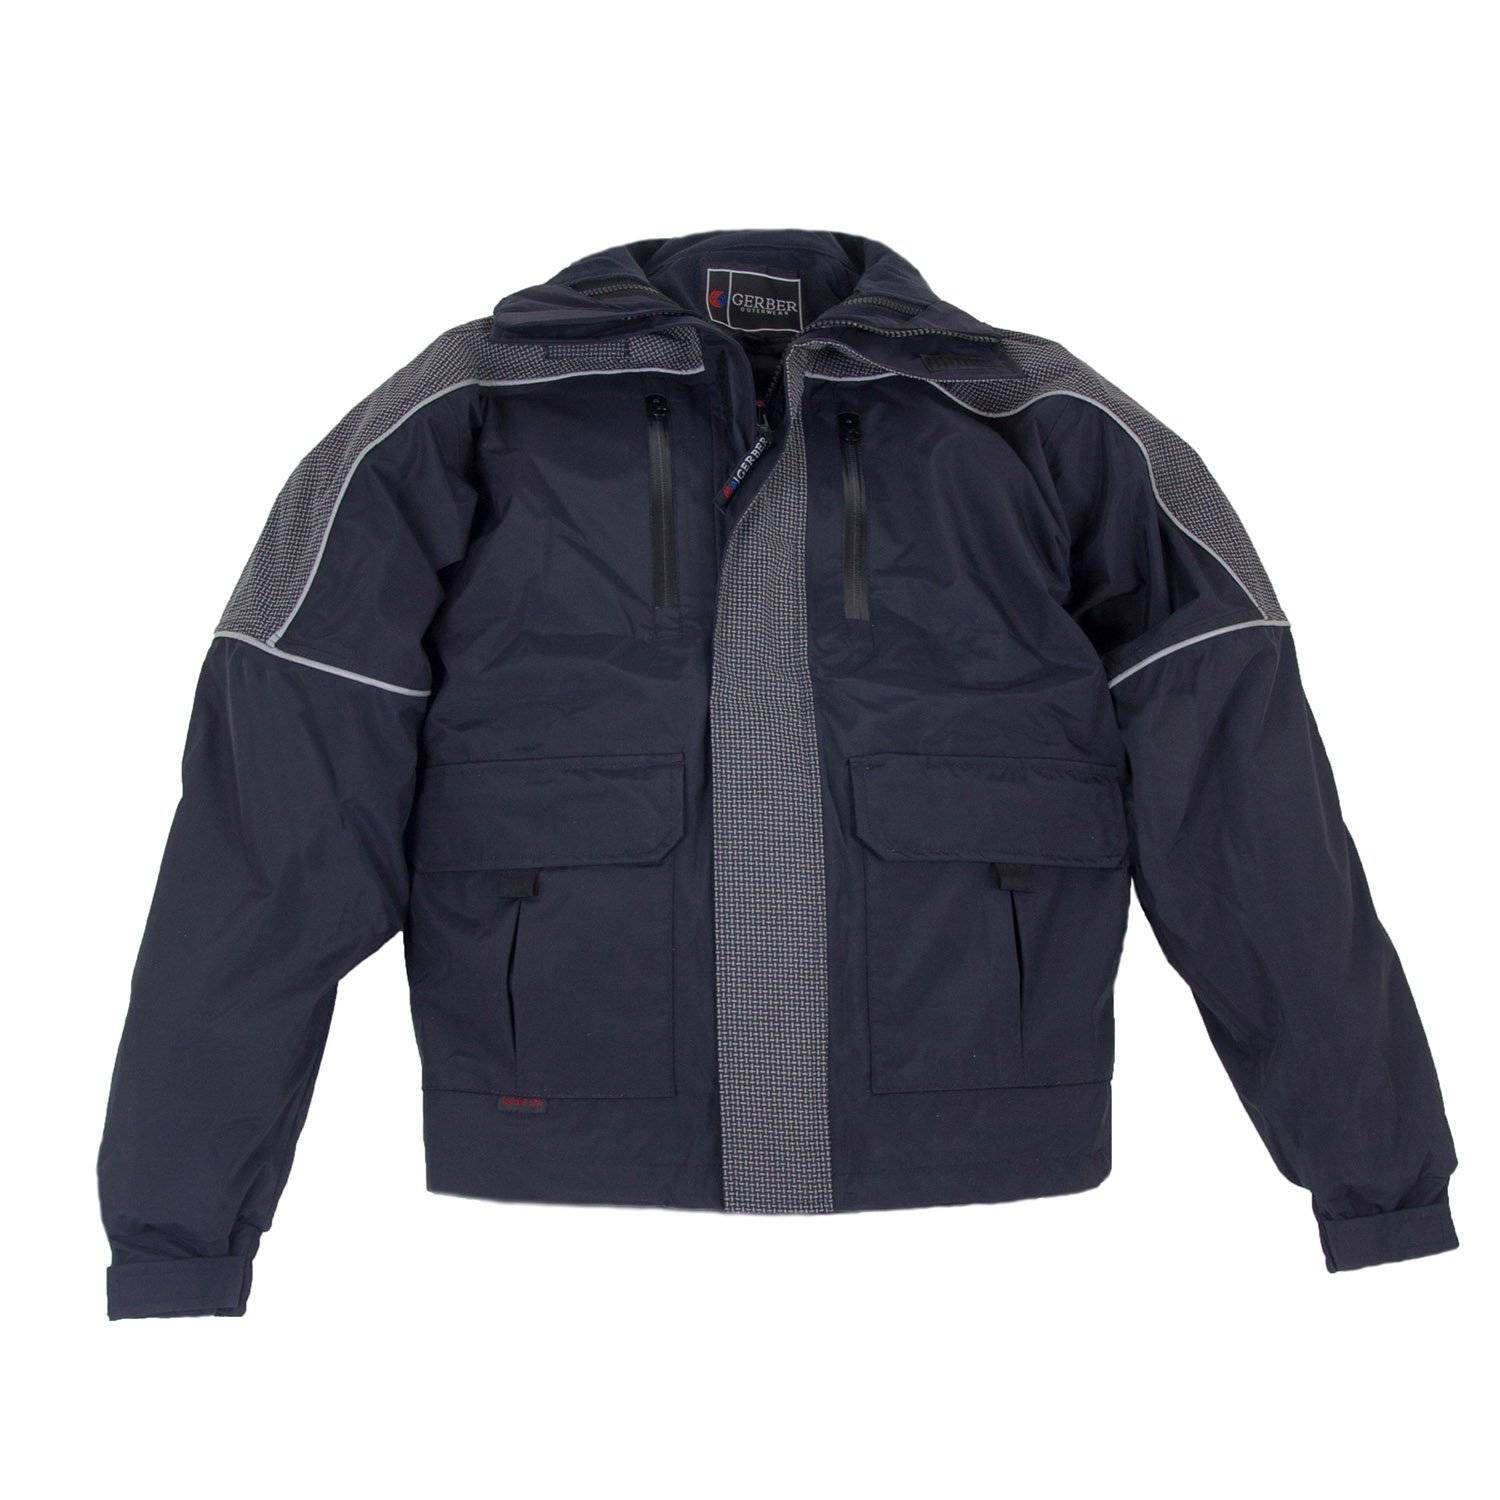 Gerber Outerwear Eclipse SX Navy Jacket with Warrior Softshe